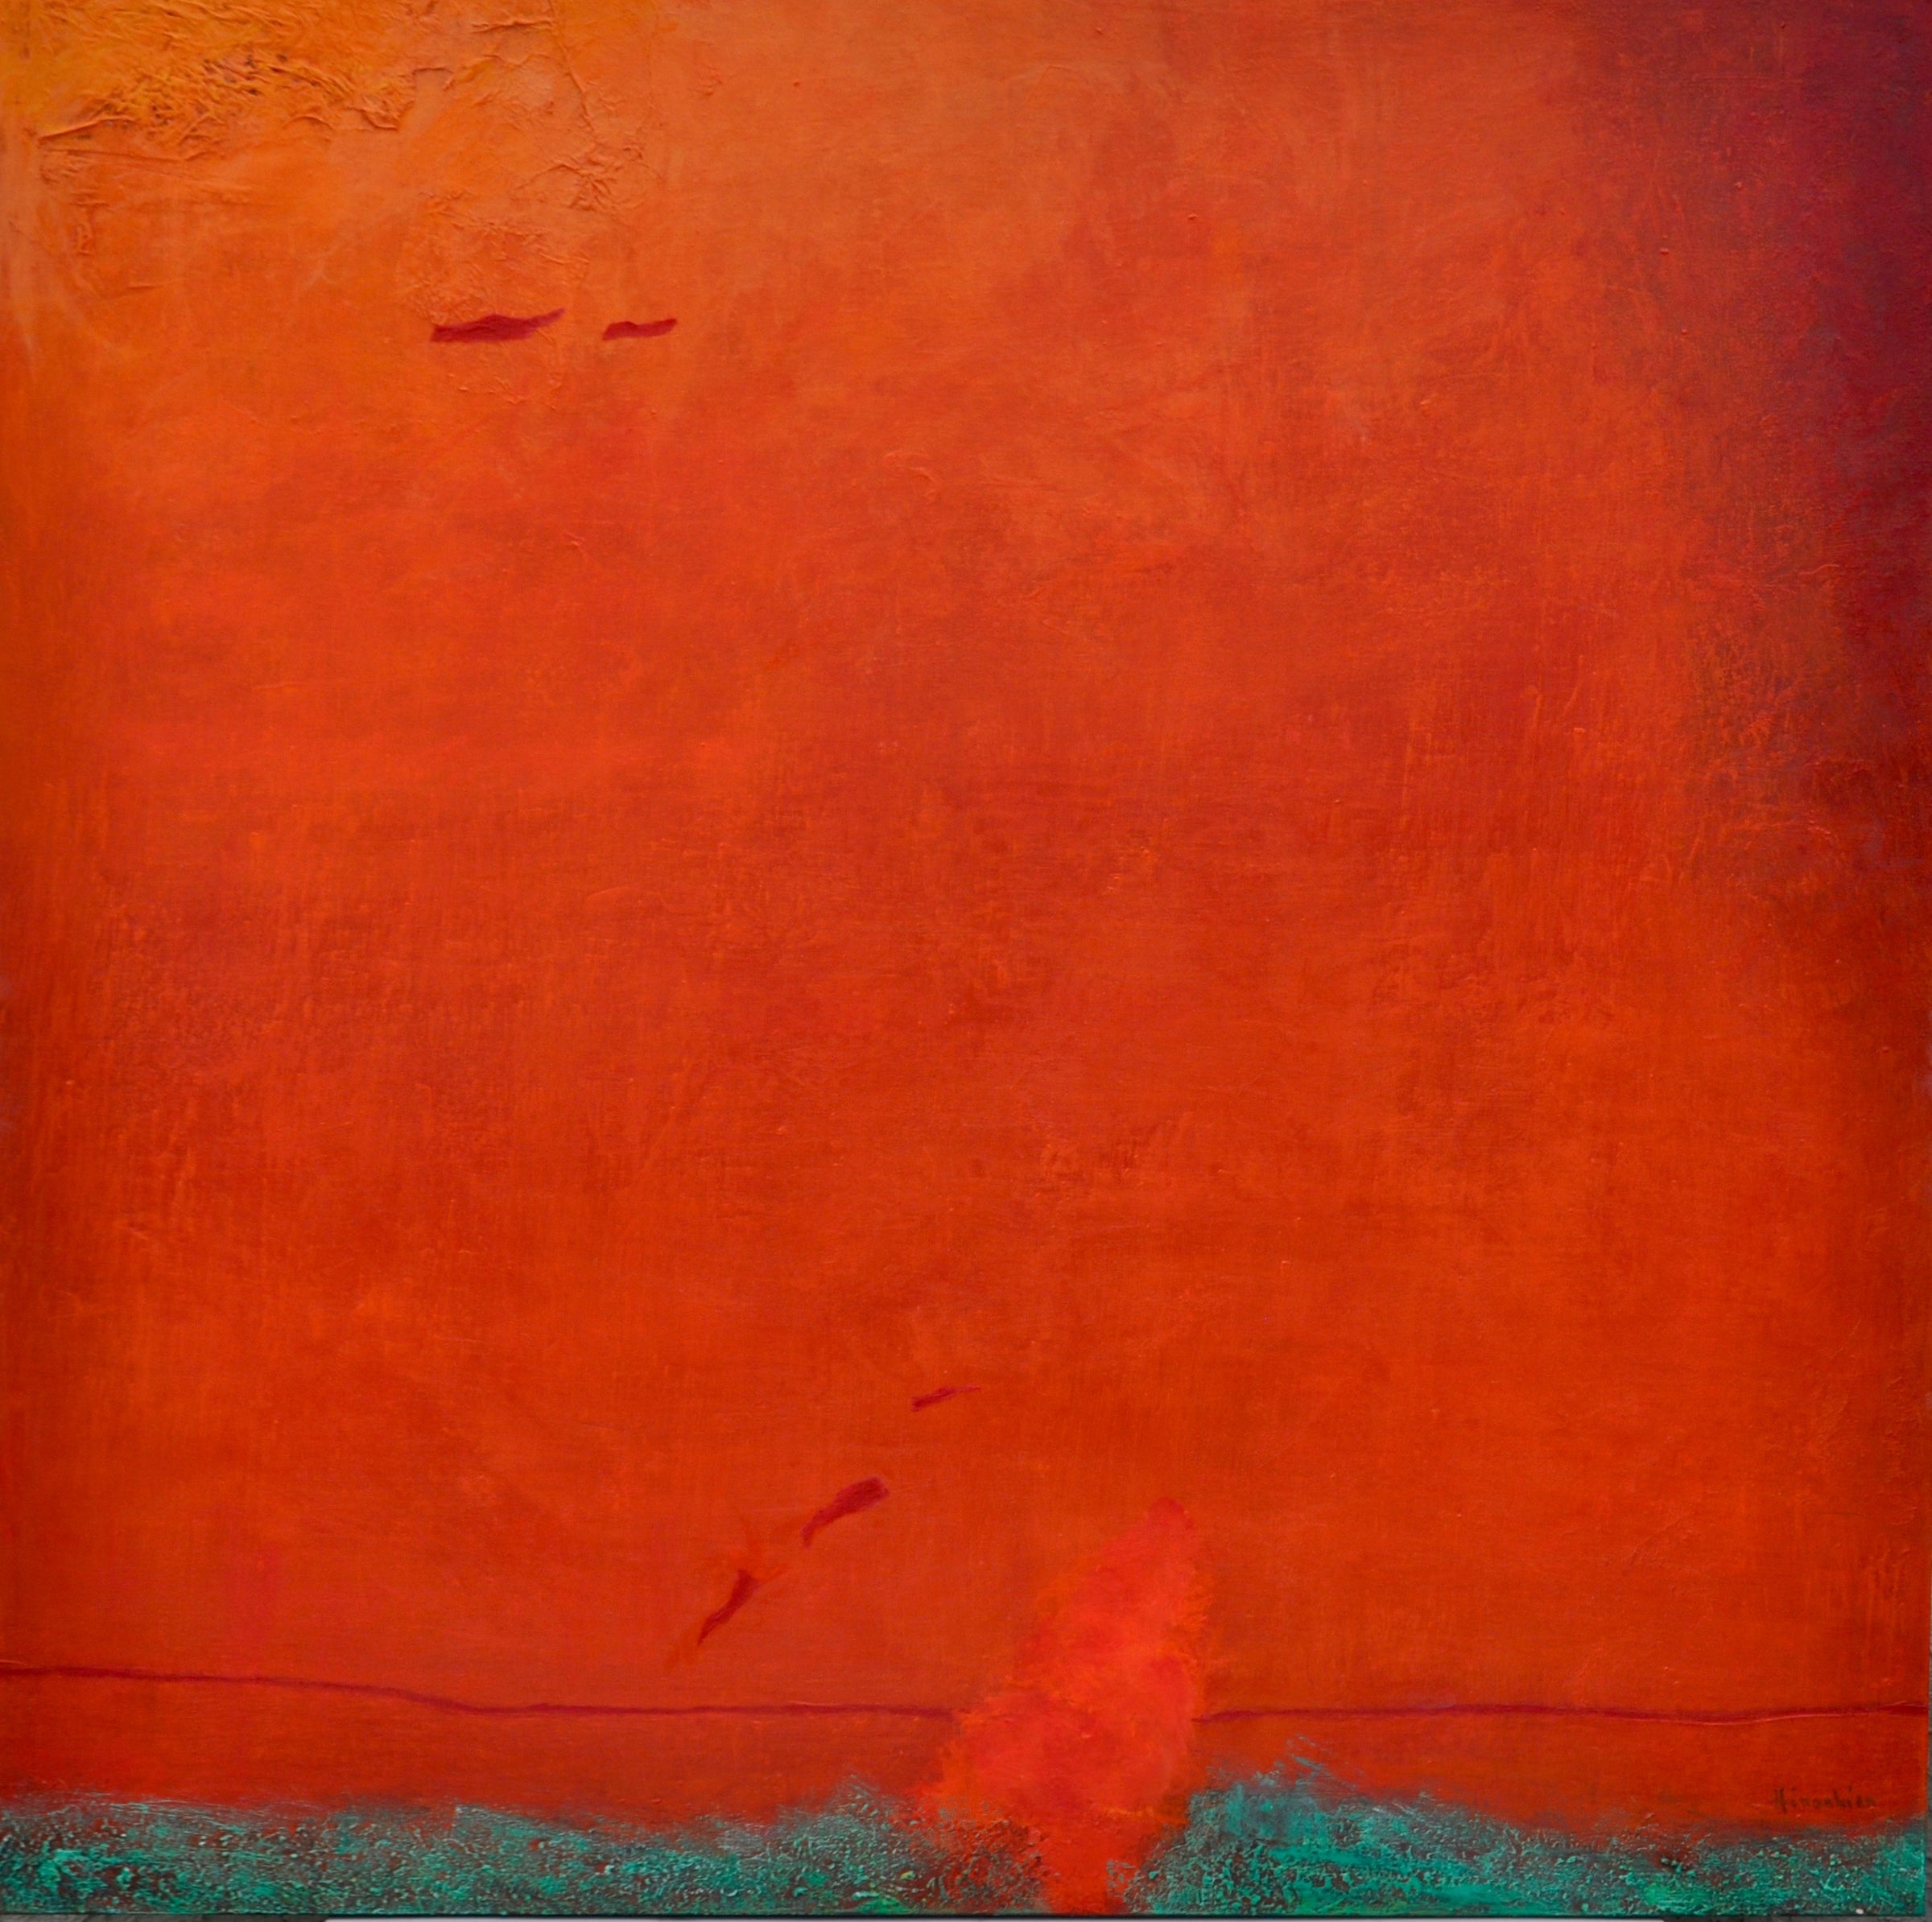 Peggy Hinaekian- Shadows in the Red Desert